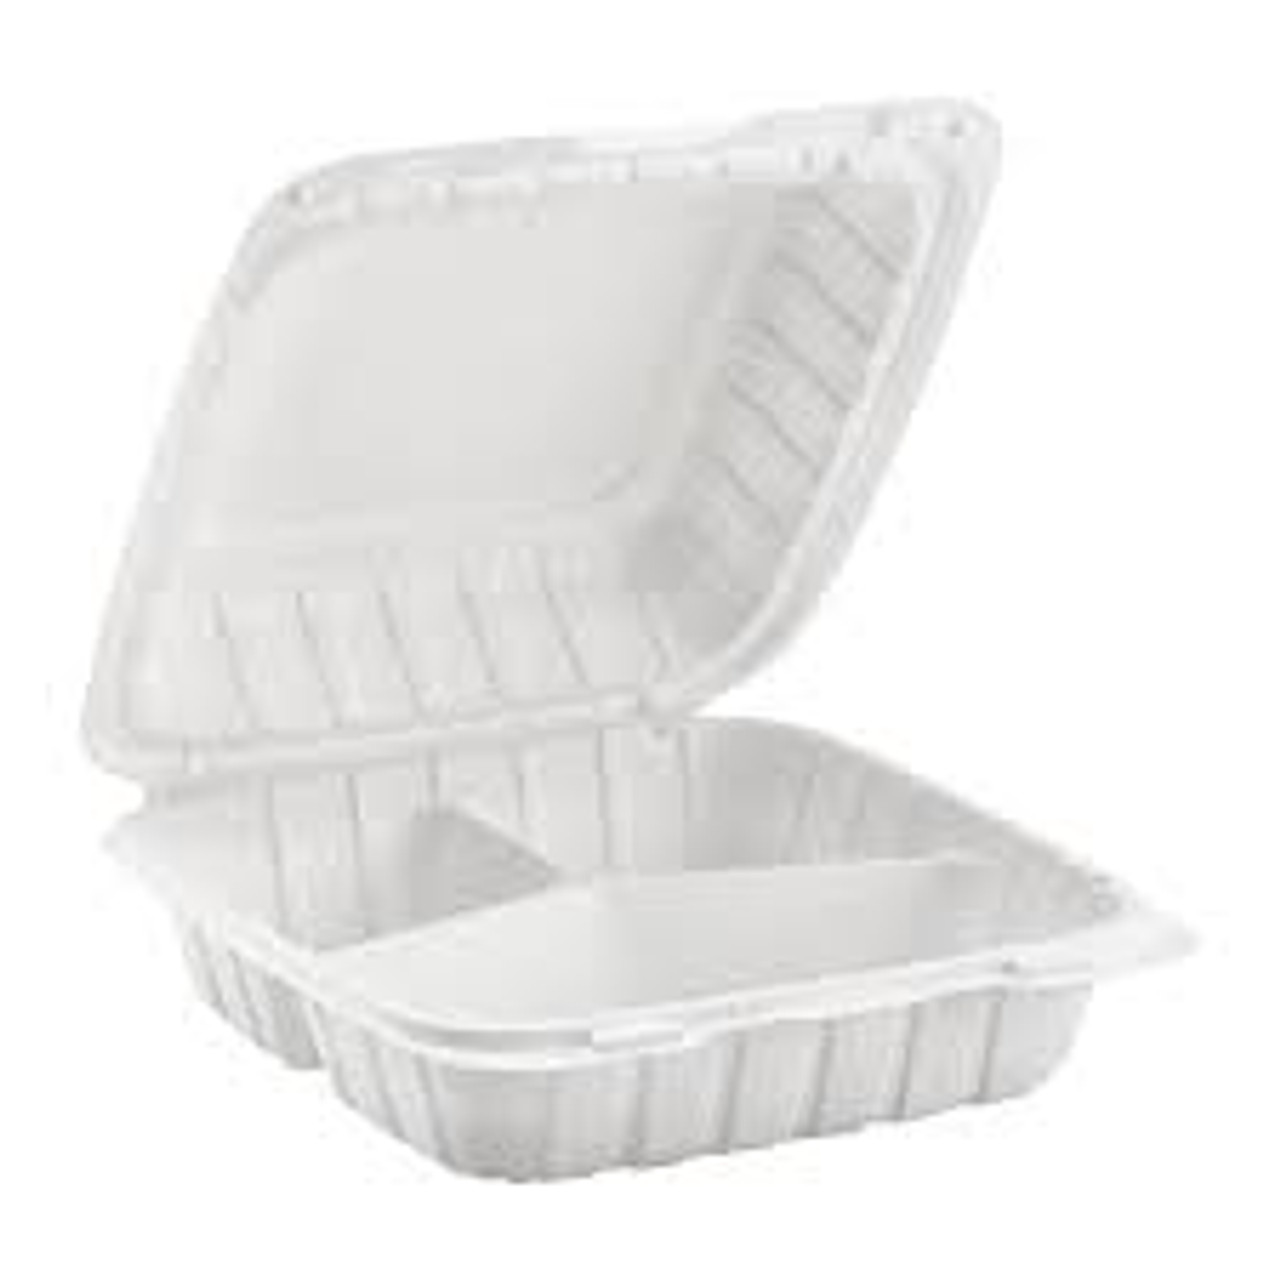 8 x 8 x 3 MFPP 3 Compartment Hinged Take Out Container White - Case of 200